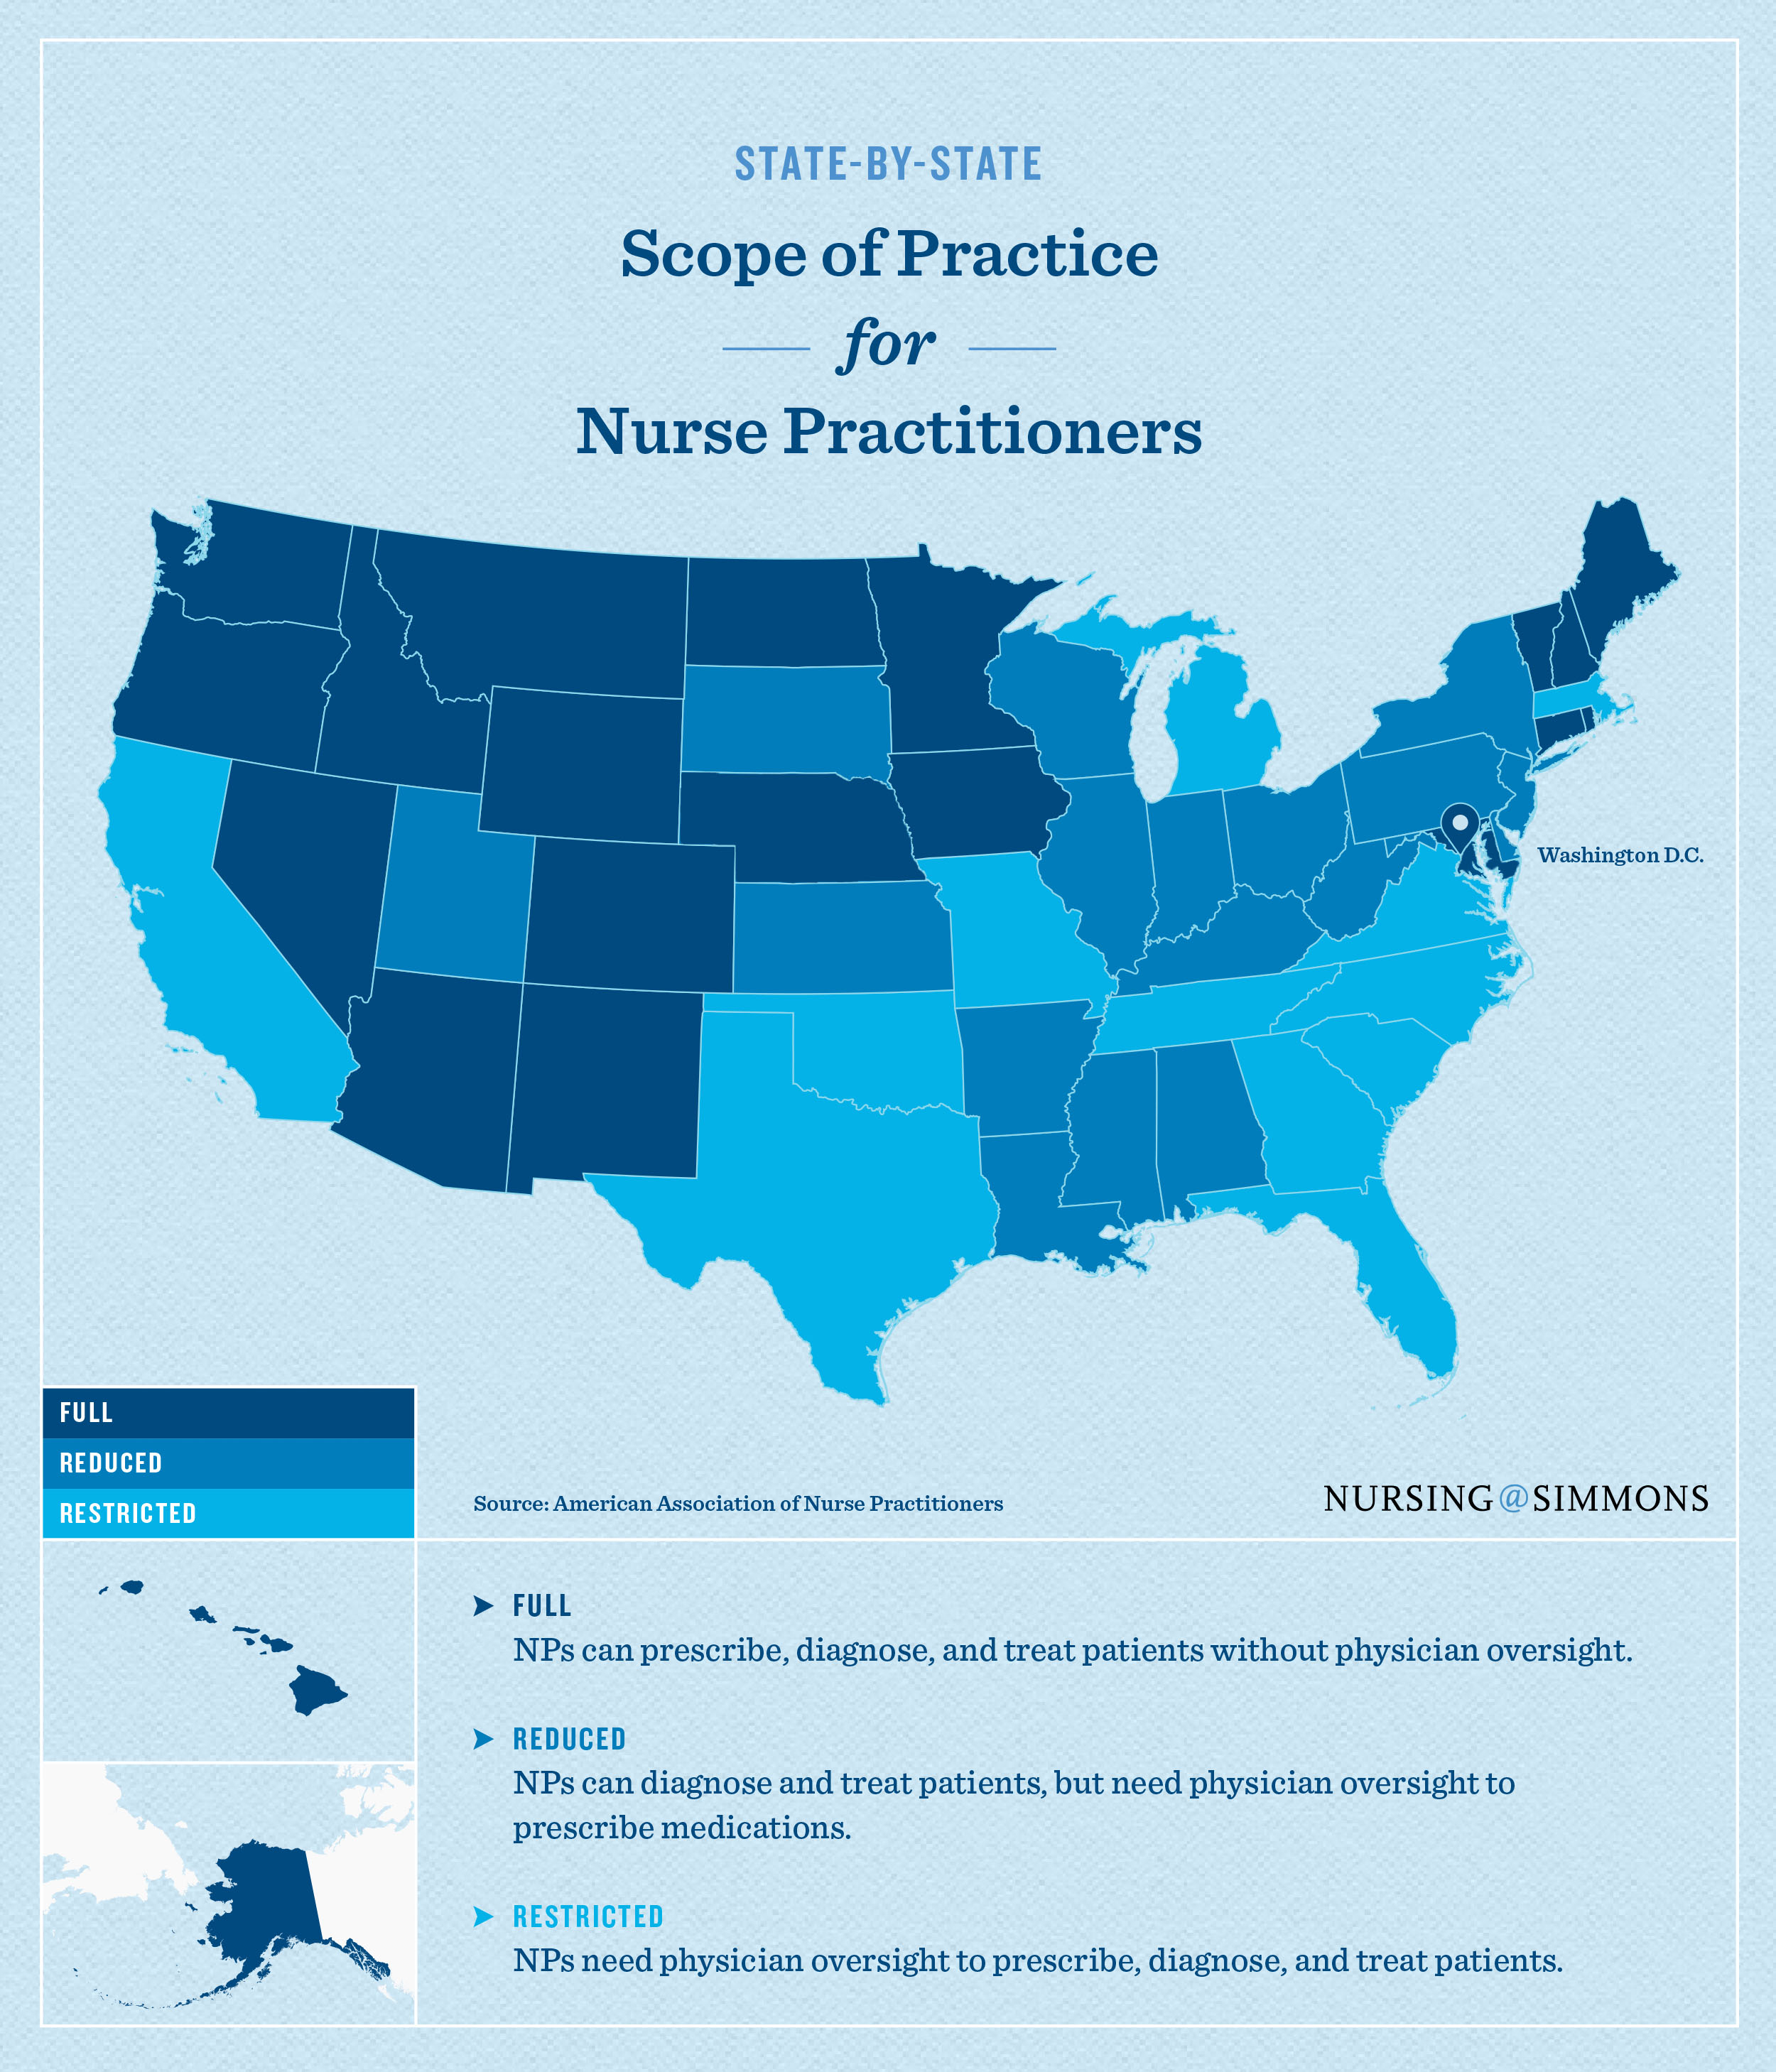 Collaborative Practice Agreement Nurse Practitioner Where Can Nurse Practitioners Work Without Physician Supervision Blog